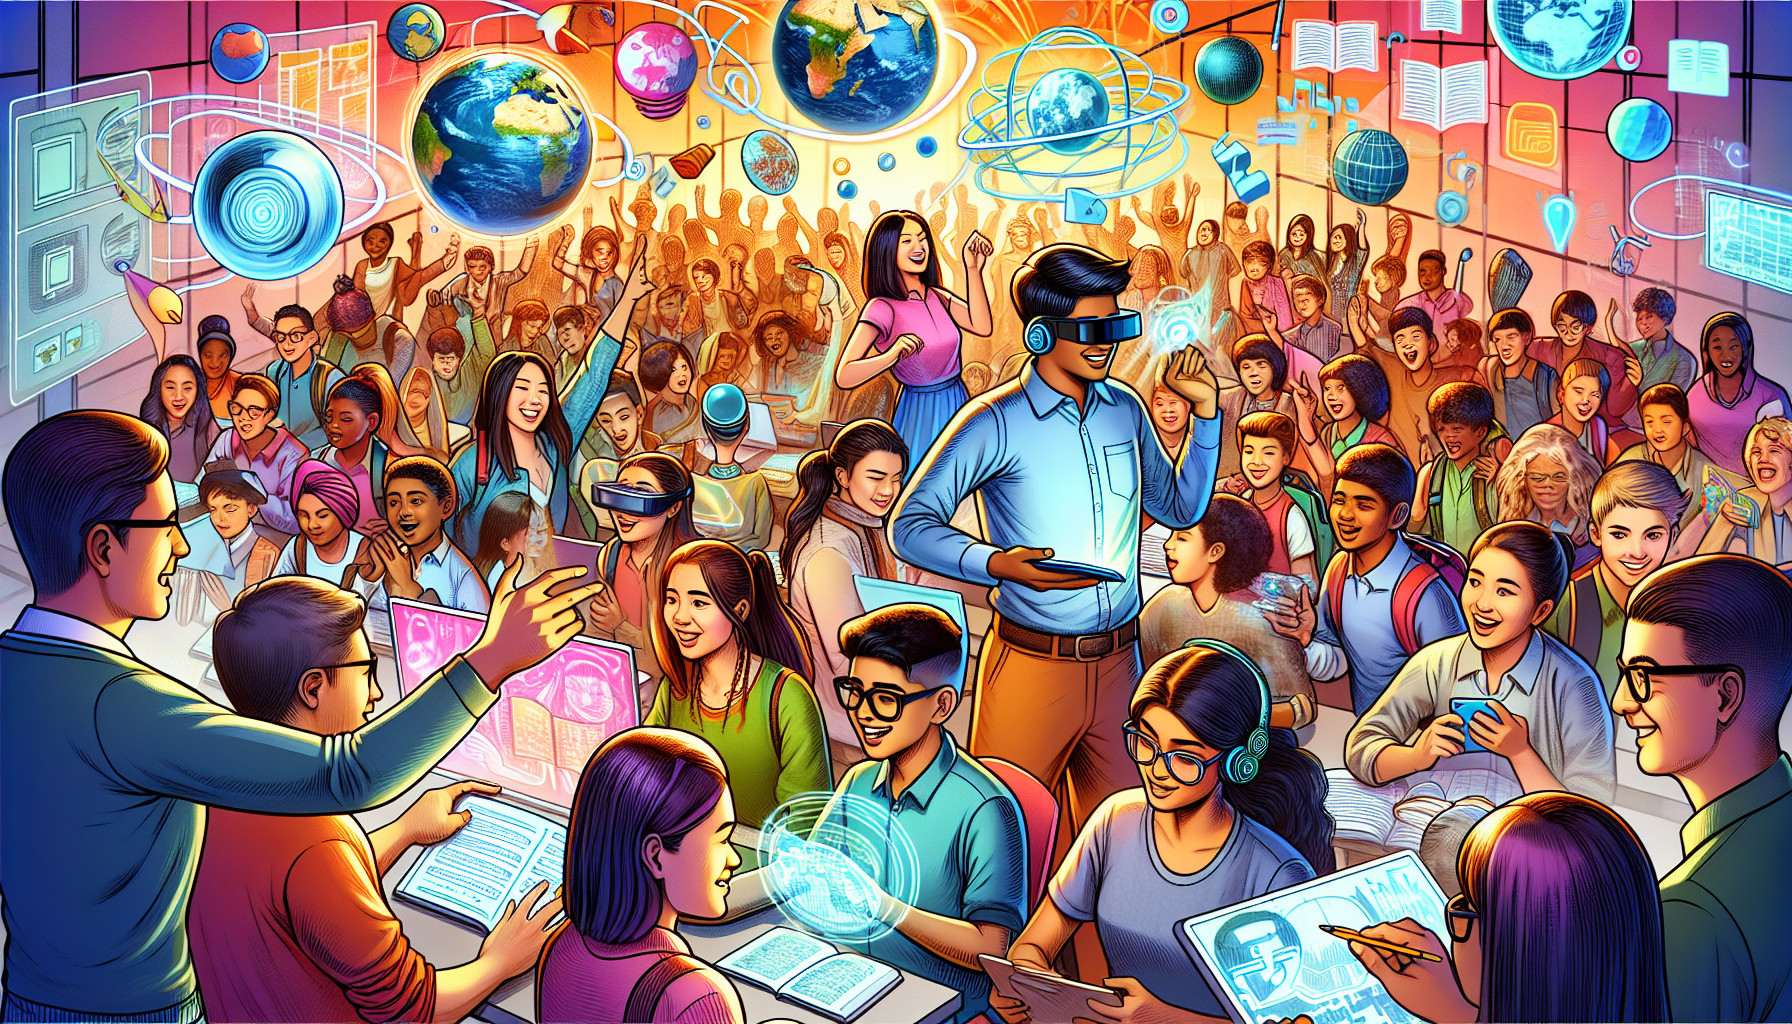 A vibrant illustration of a classroom filled with students interacting with multimedia and visual aids